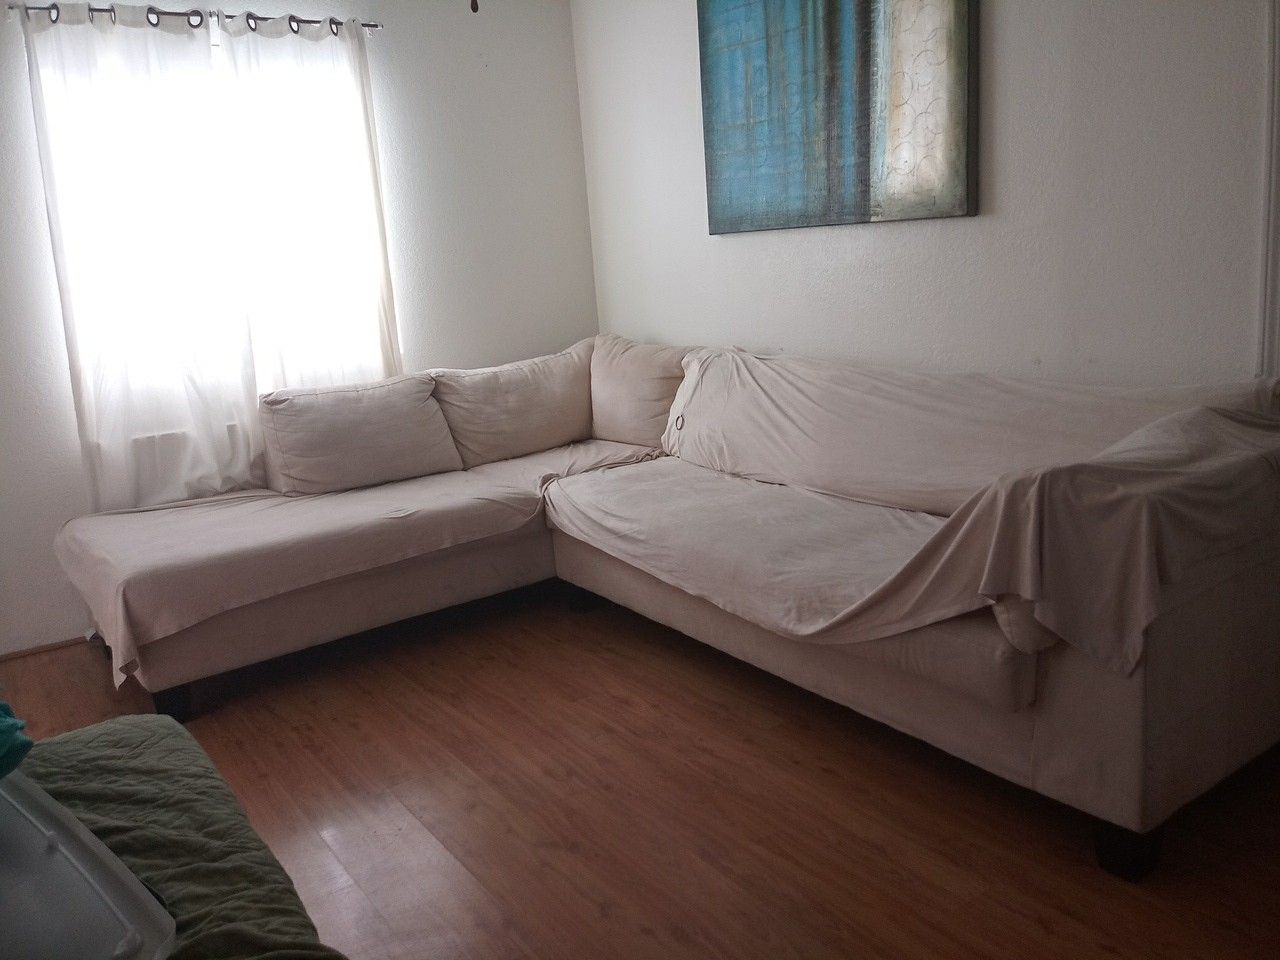 Furniture: Living Room Sofa, Kitchen Table, Bedroom Bed and Mini Foldable Sofa